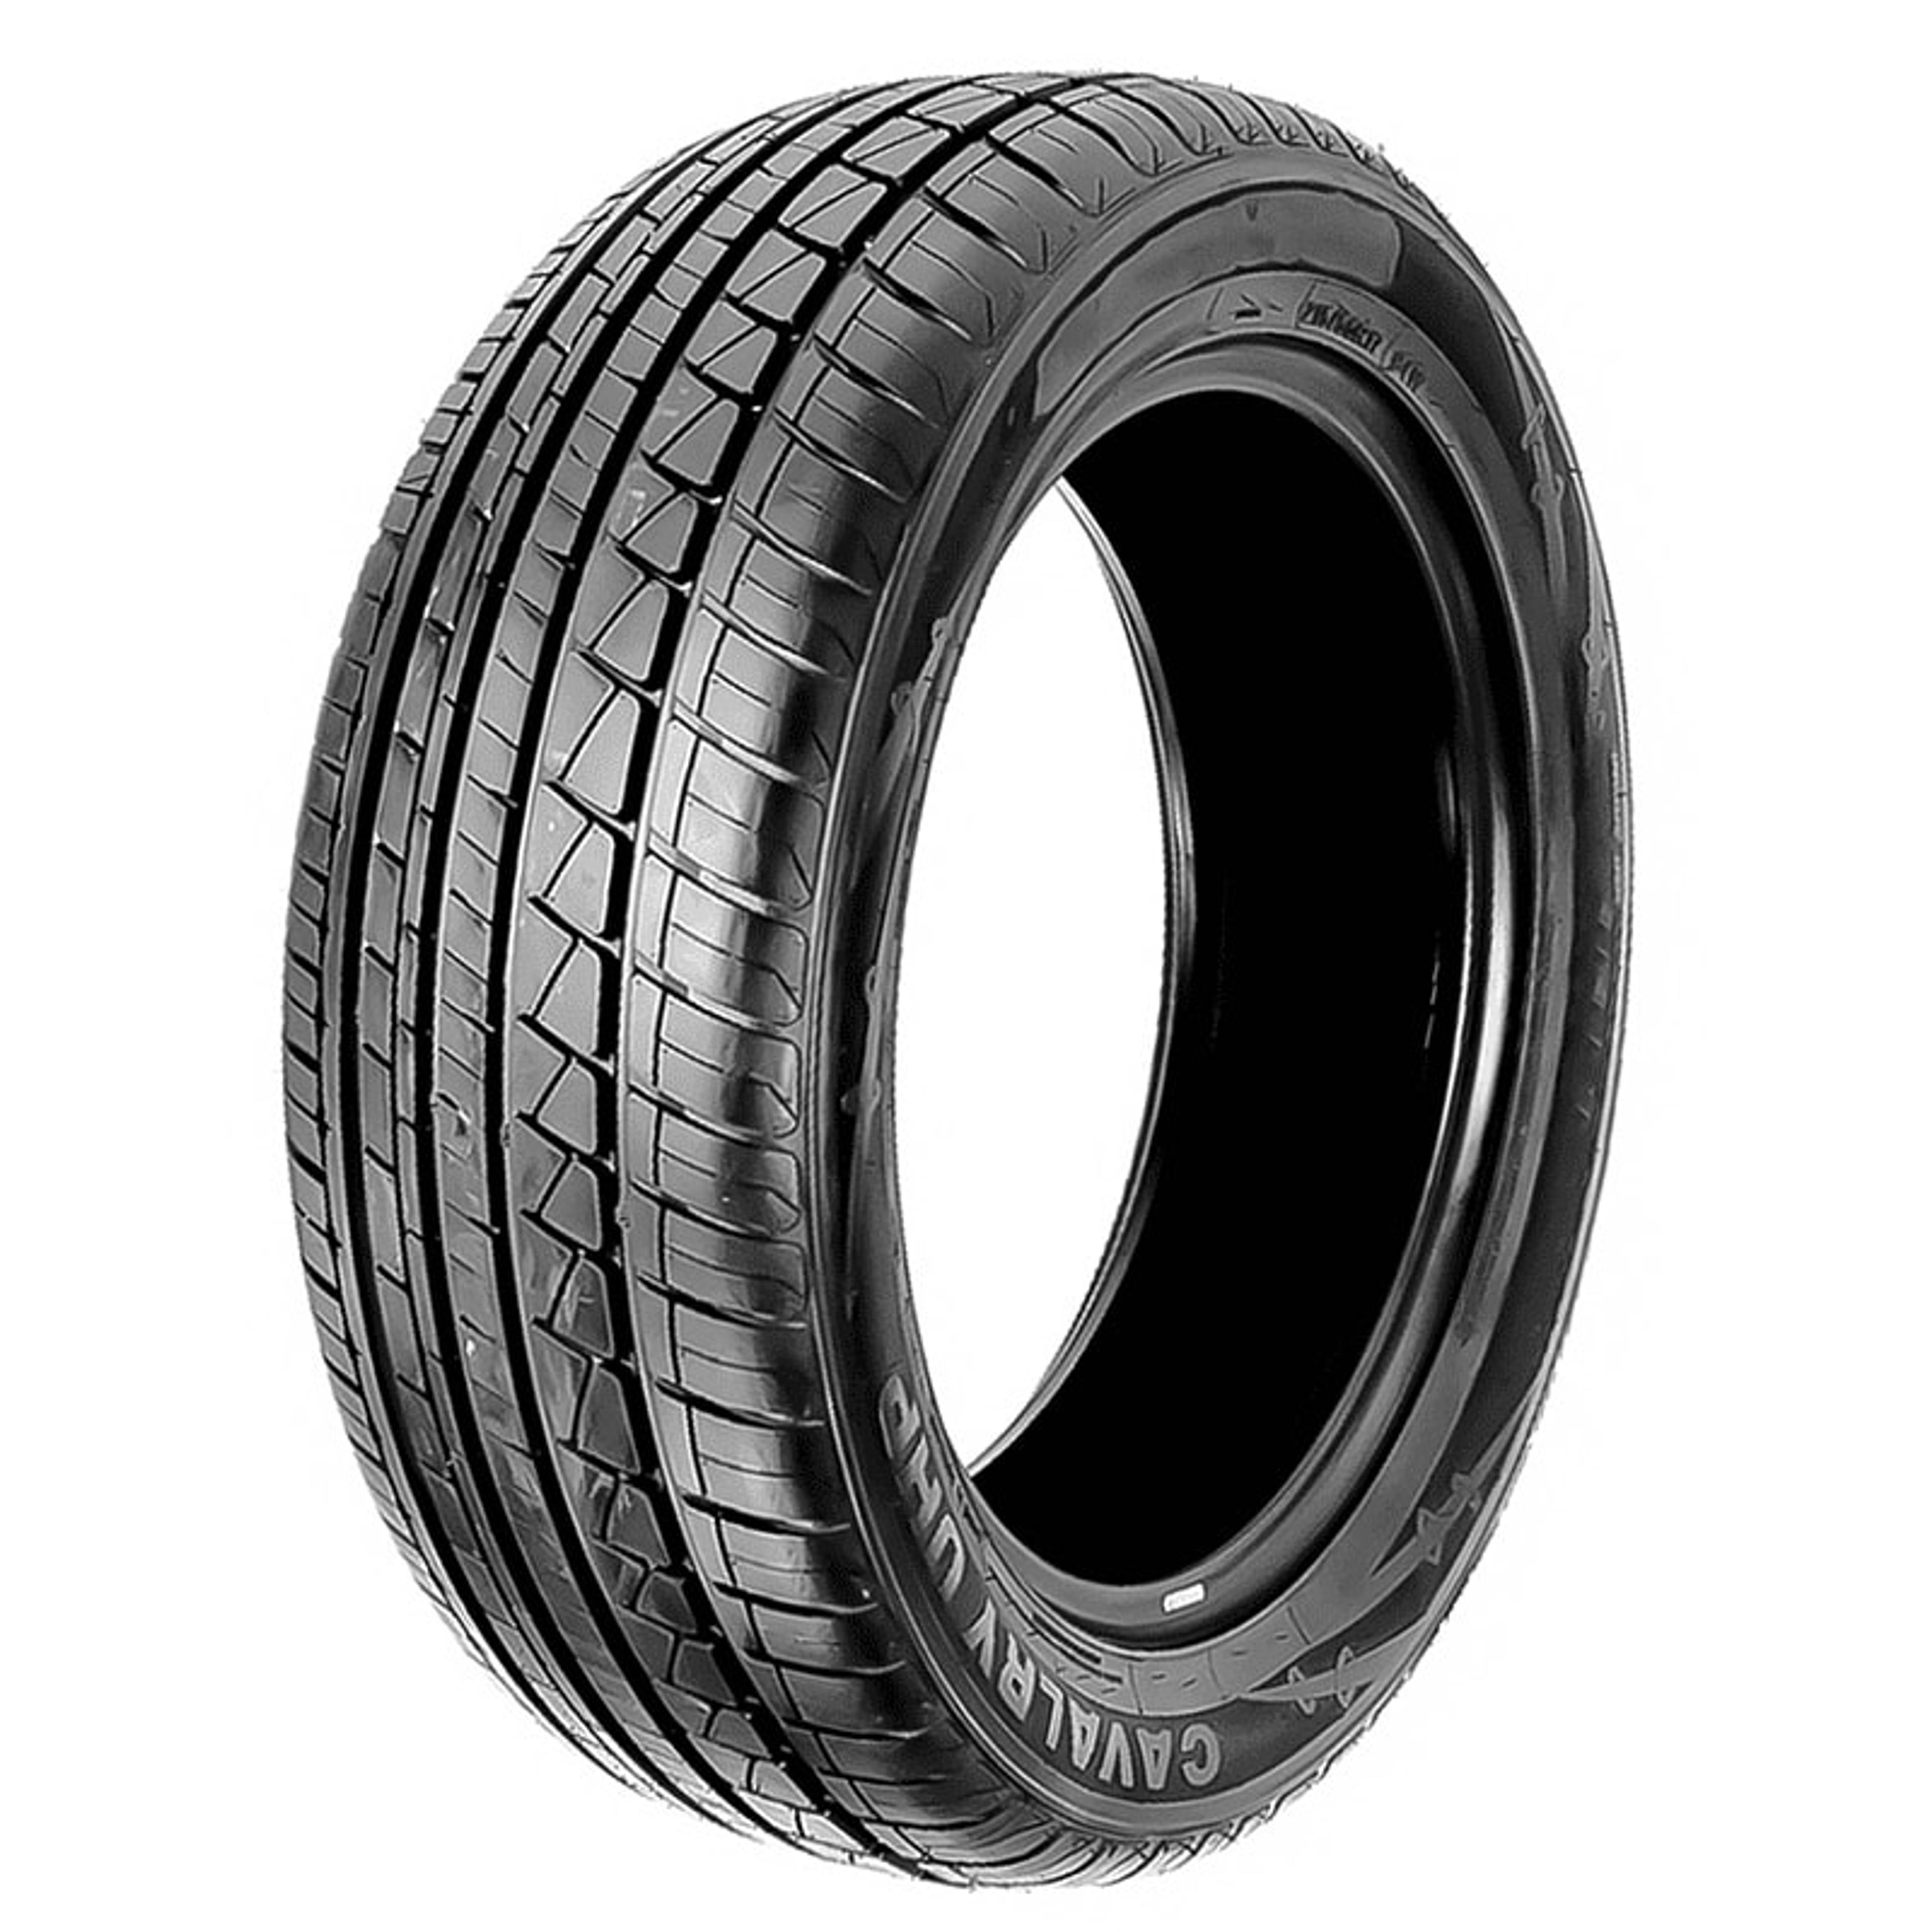 205/45R17 Tires  Buy Discount Tires on Sale Today